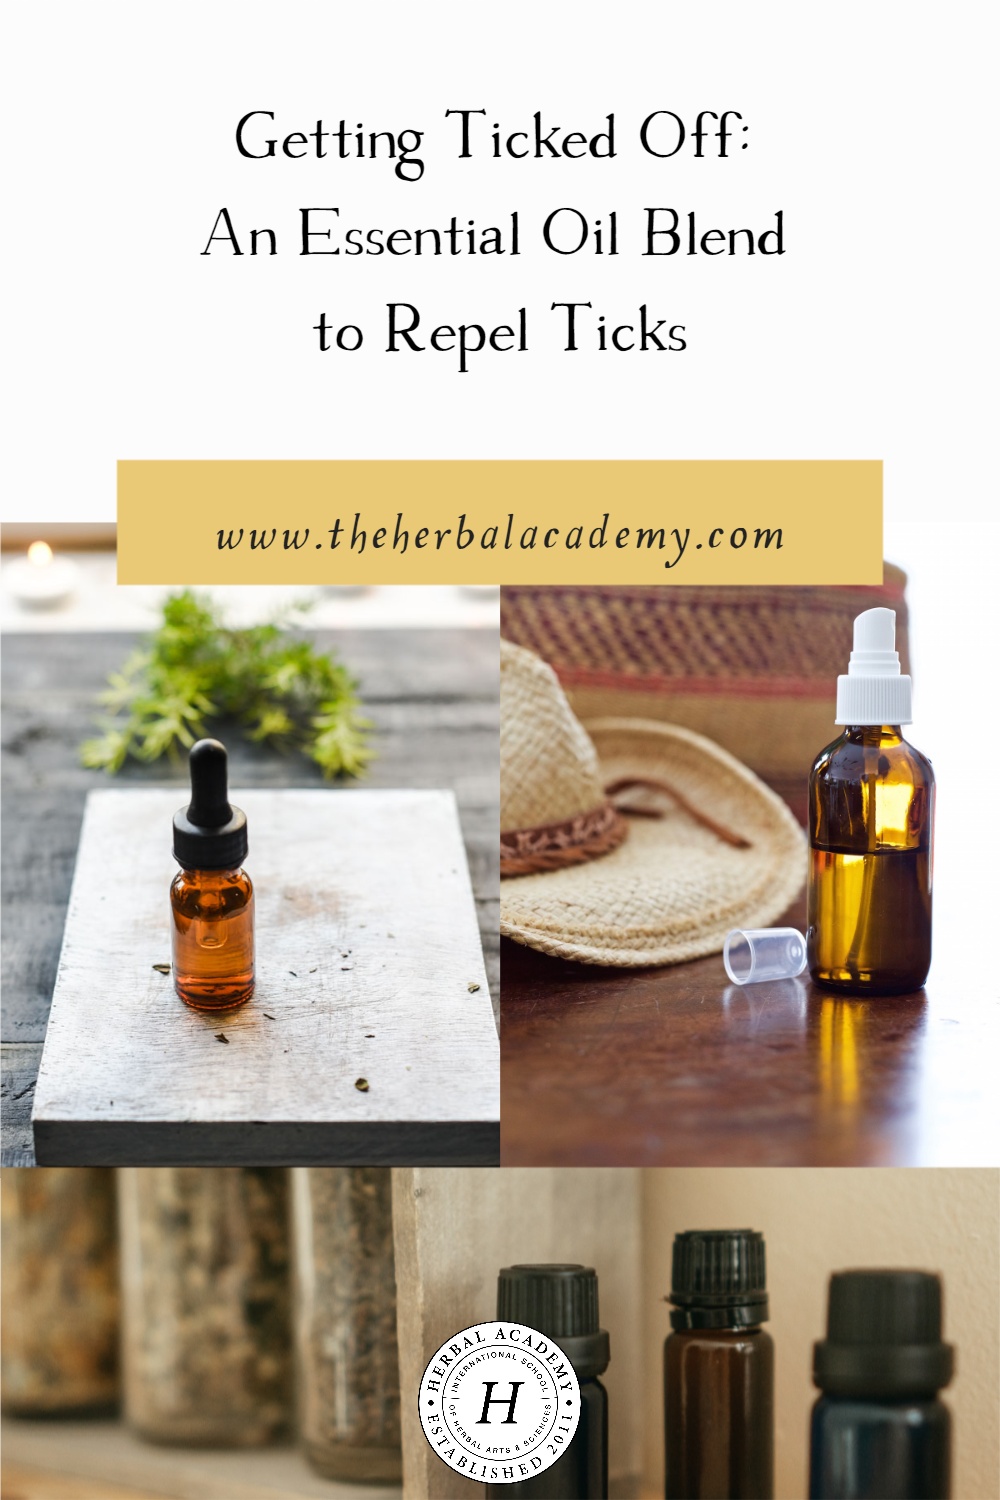 Getting Ticked Off: An Essential Oil Blend to Repel Ticks | Herbal Academy | Preventing bites is vital as the prevalence of tick-borne diseases spread. Try out this tick-repellent essential oil blend to repel ticks!